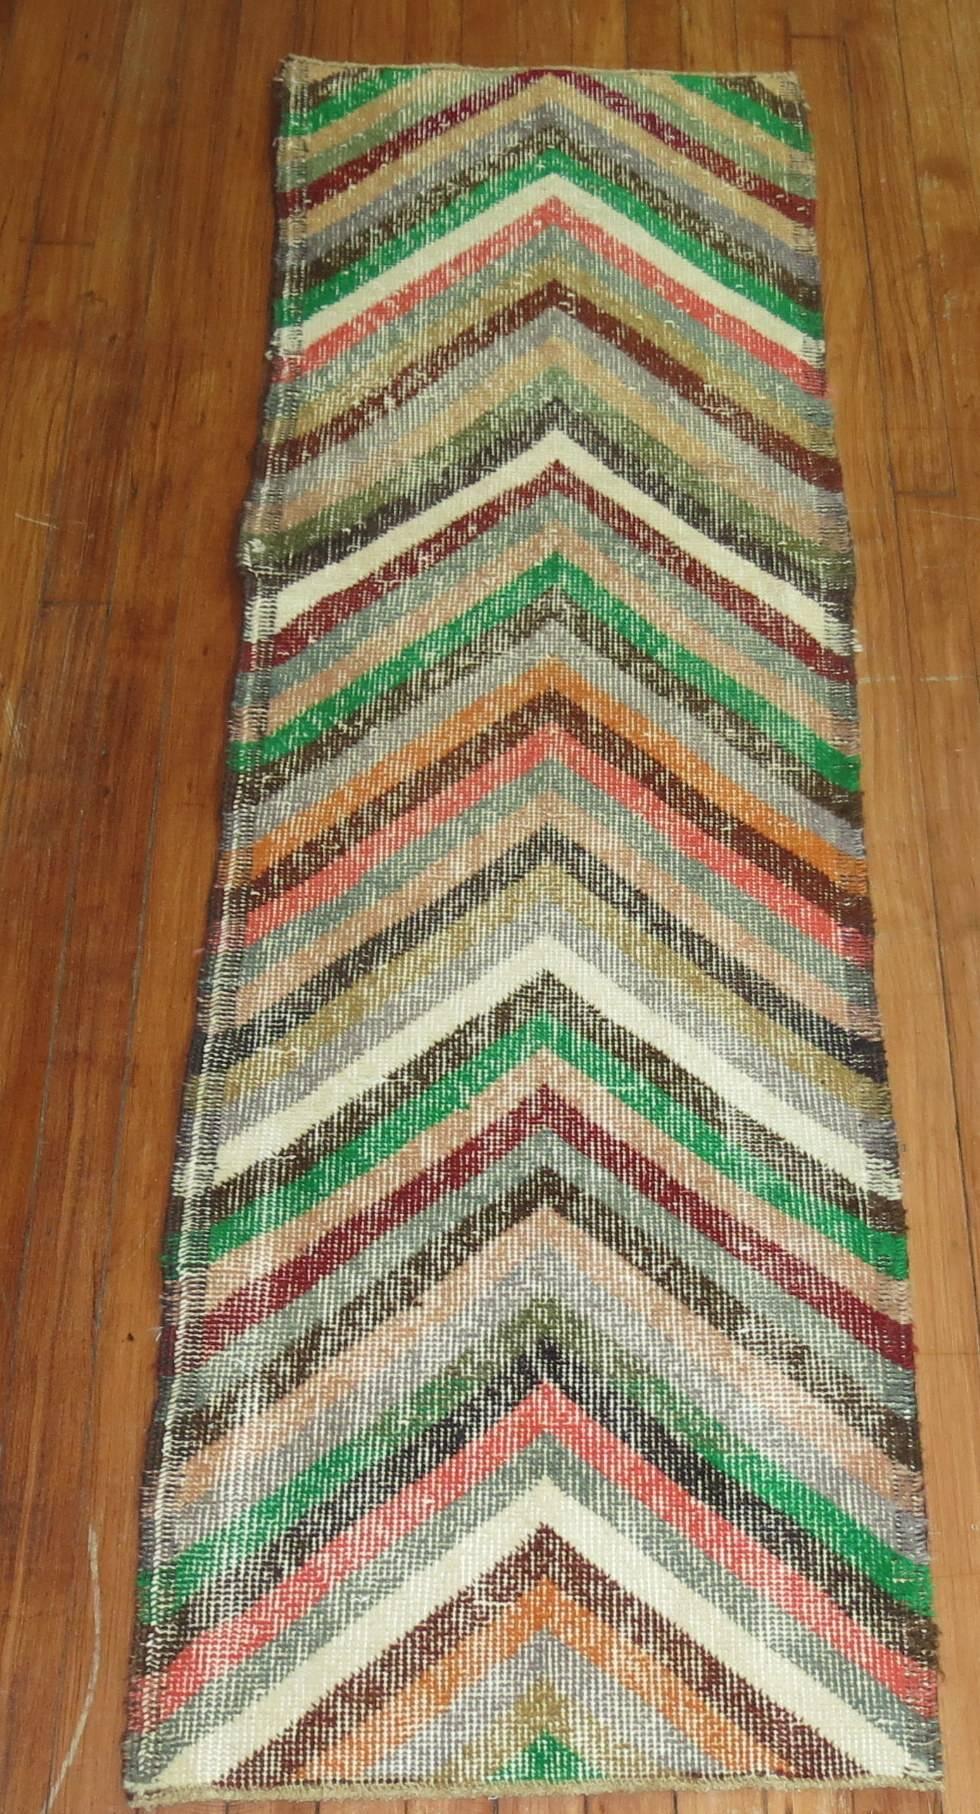 A colorful mid-20th century shabby chic Turkish runner.

Measures: 1'9” x 5'7”.